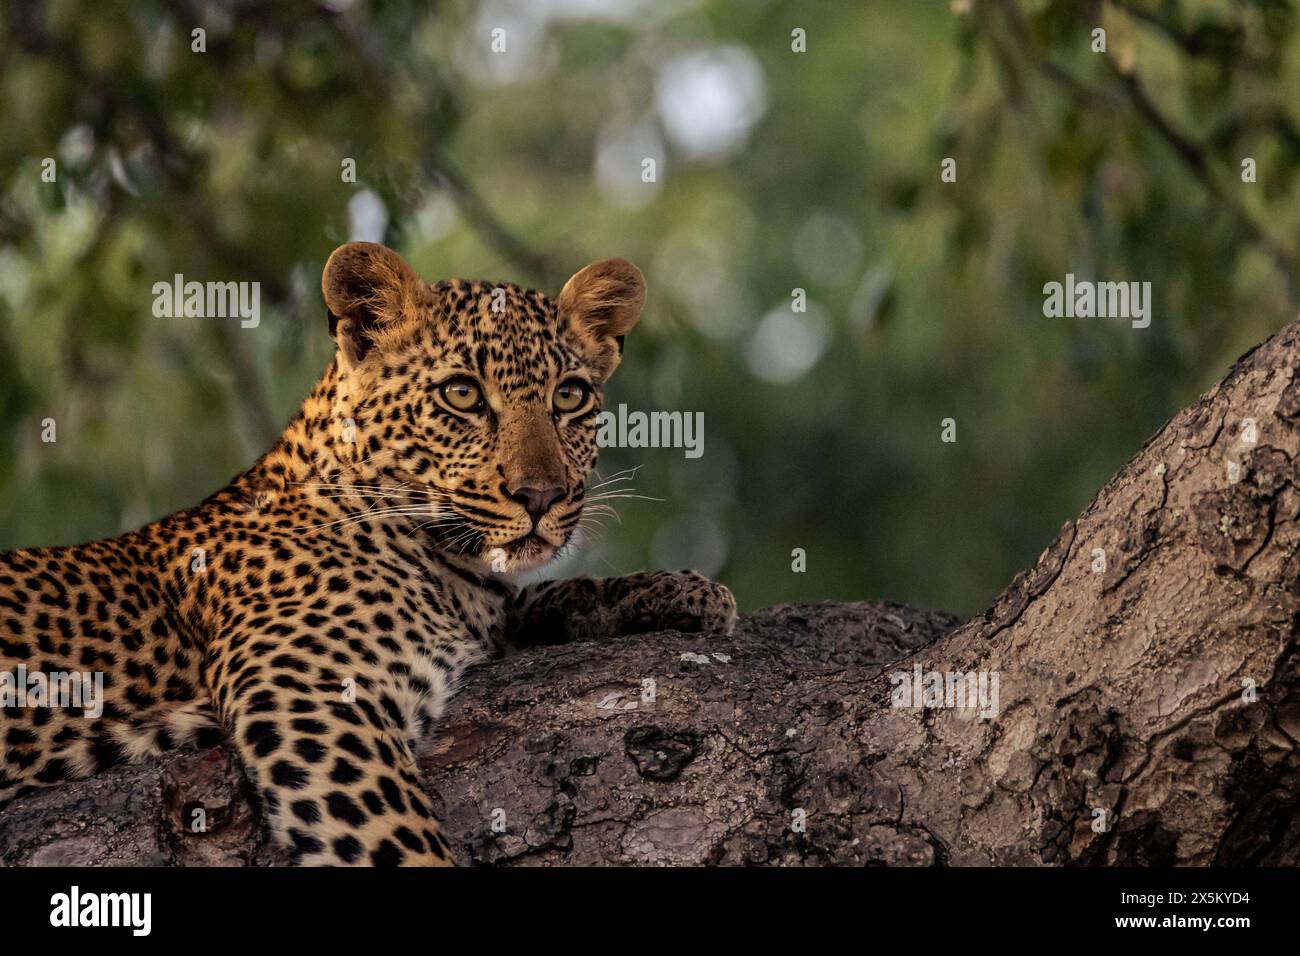 A female leopard, Panthera pardus, lying in a tree, close-up. Stock Photo